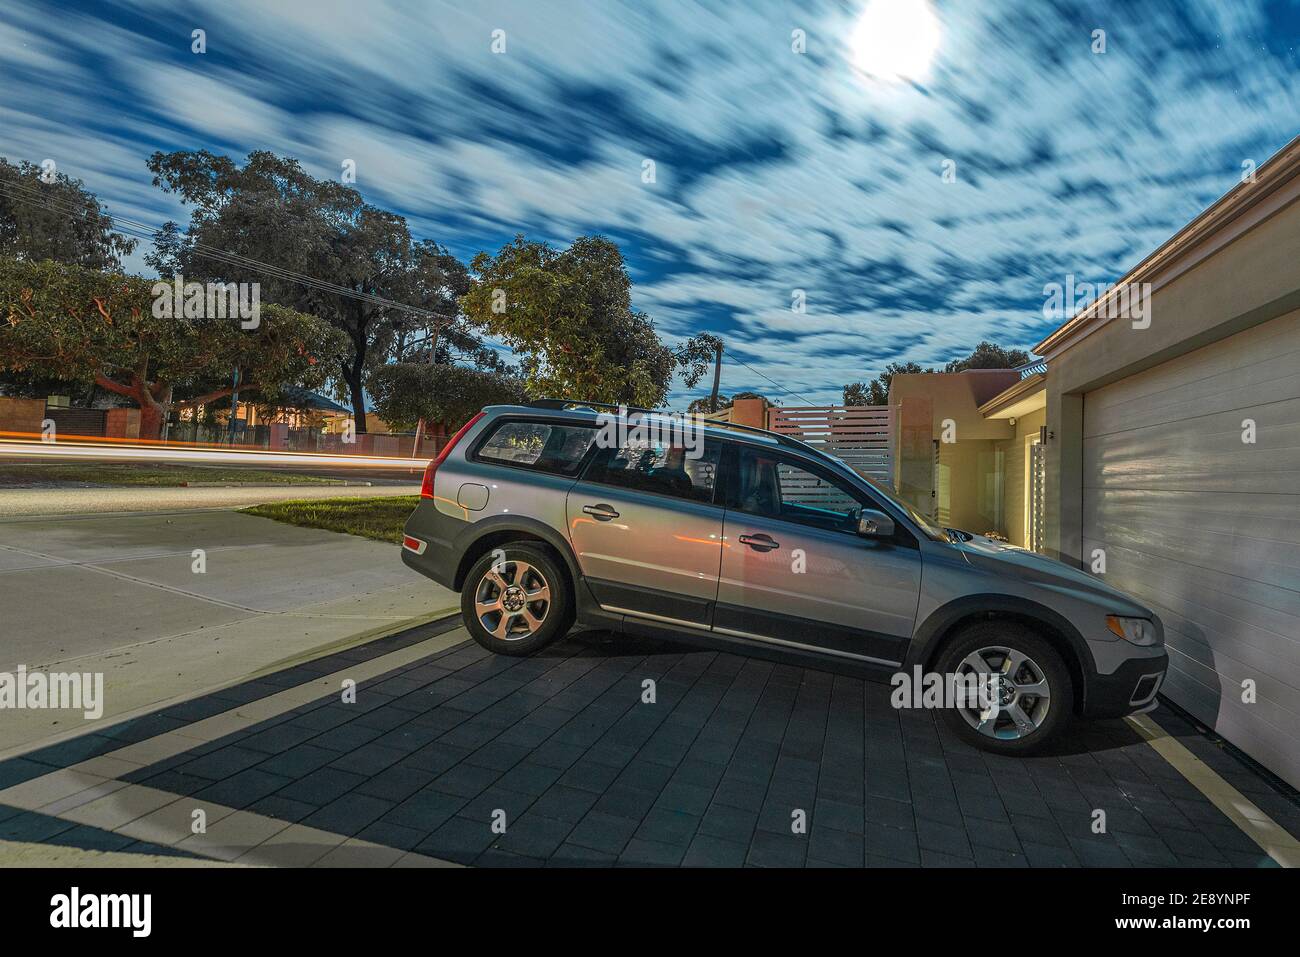 A night time exposure by moonlight of a modern Australian suburban street, with a Volvo car in a driveway. Stock Photo